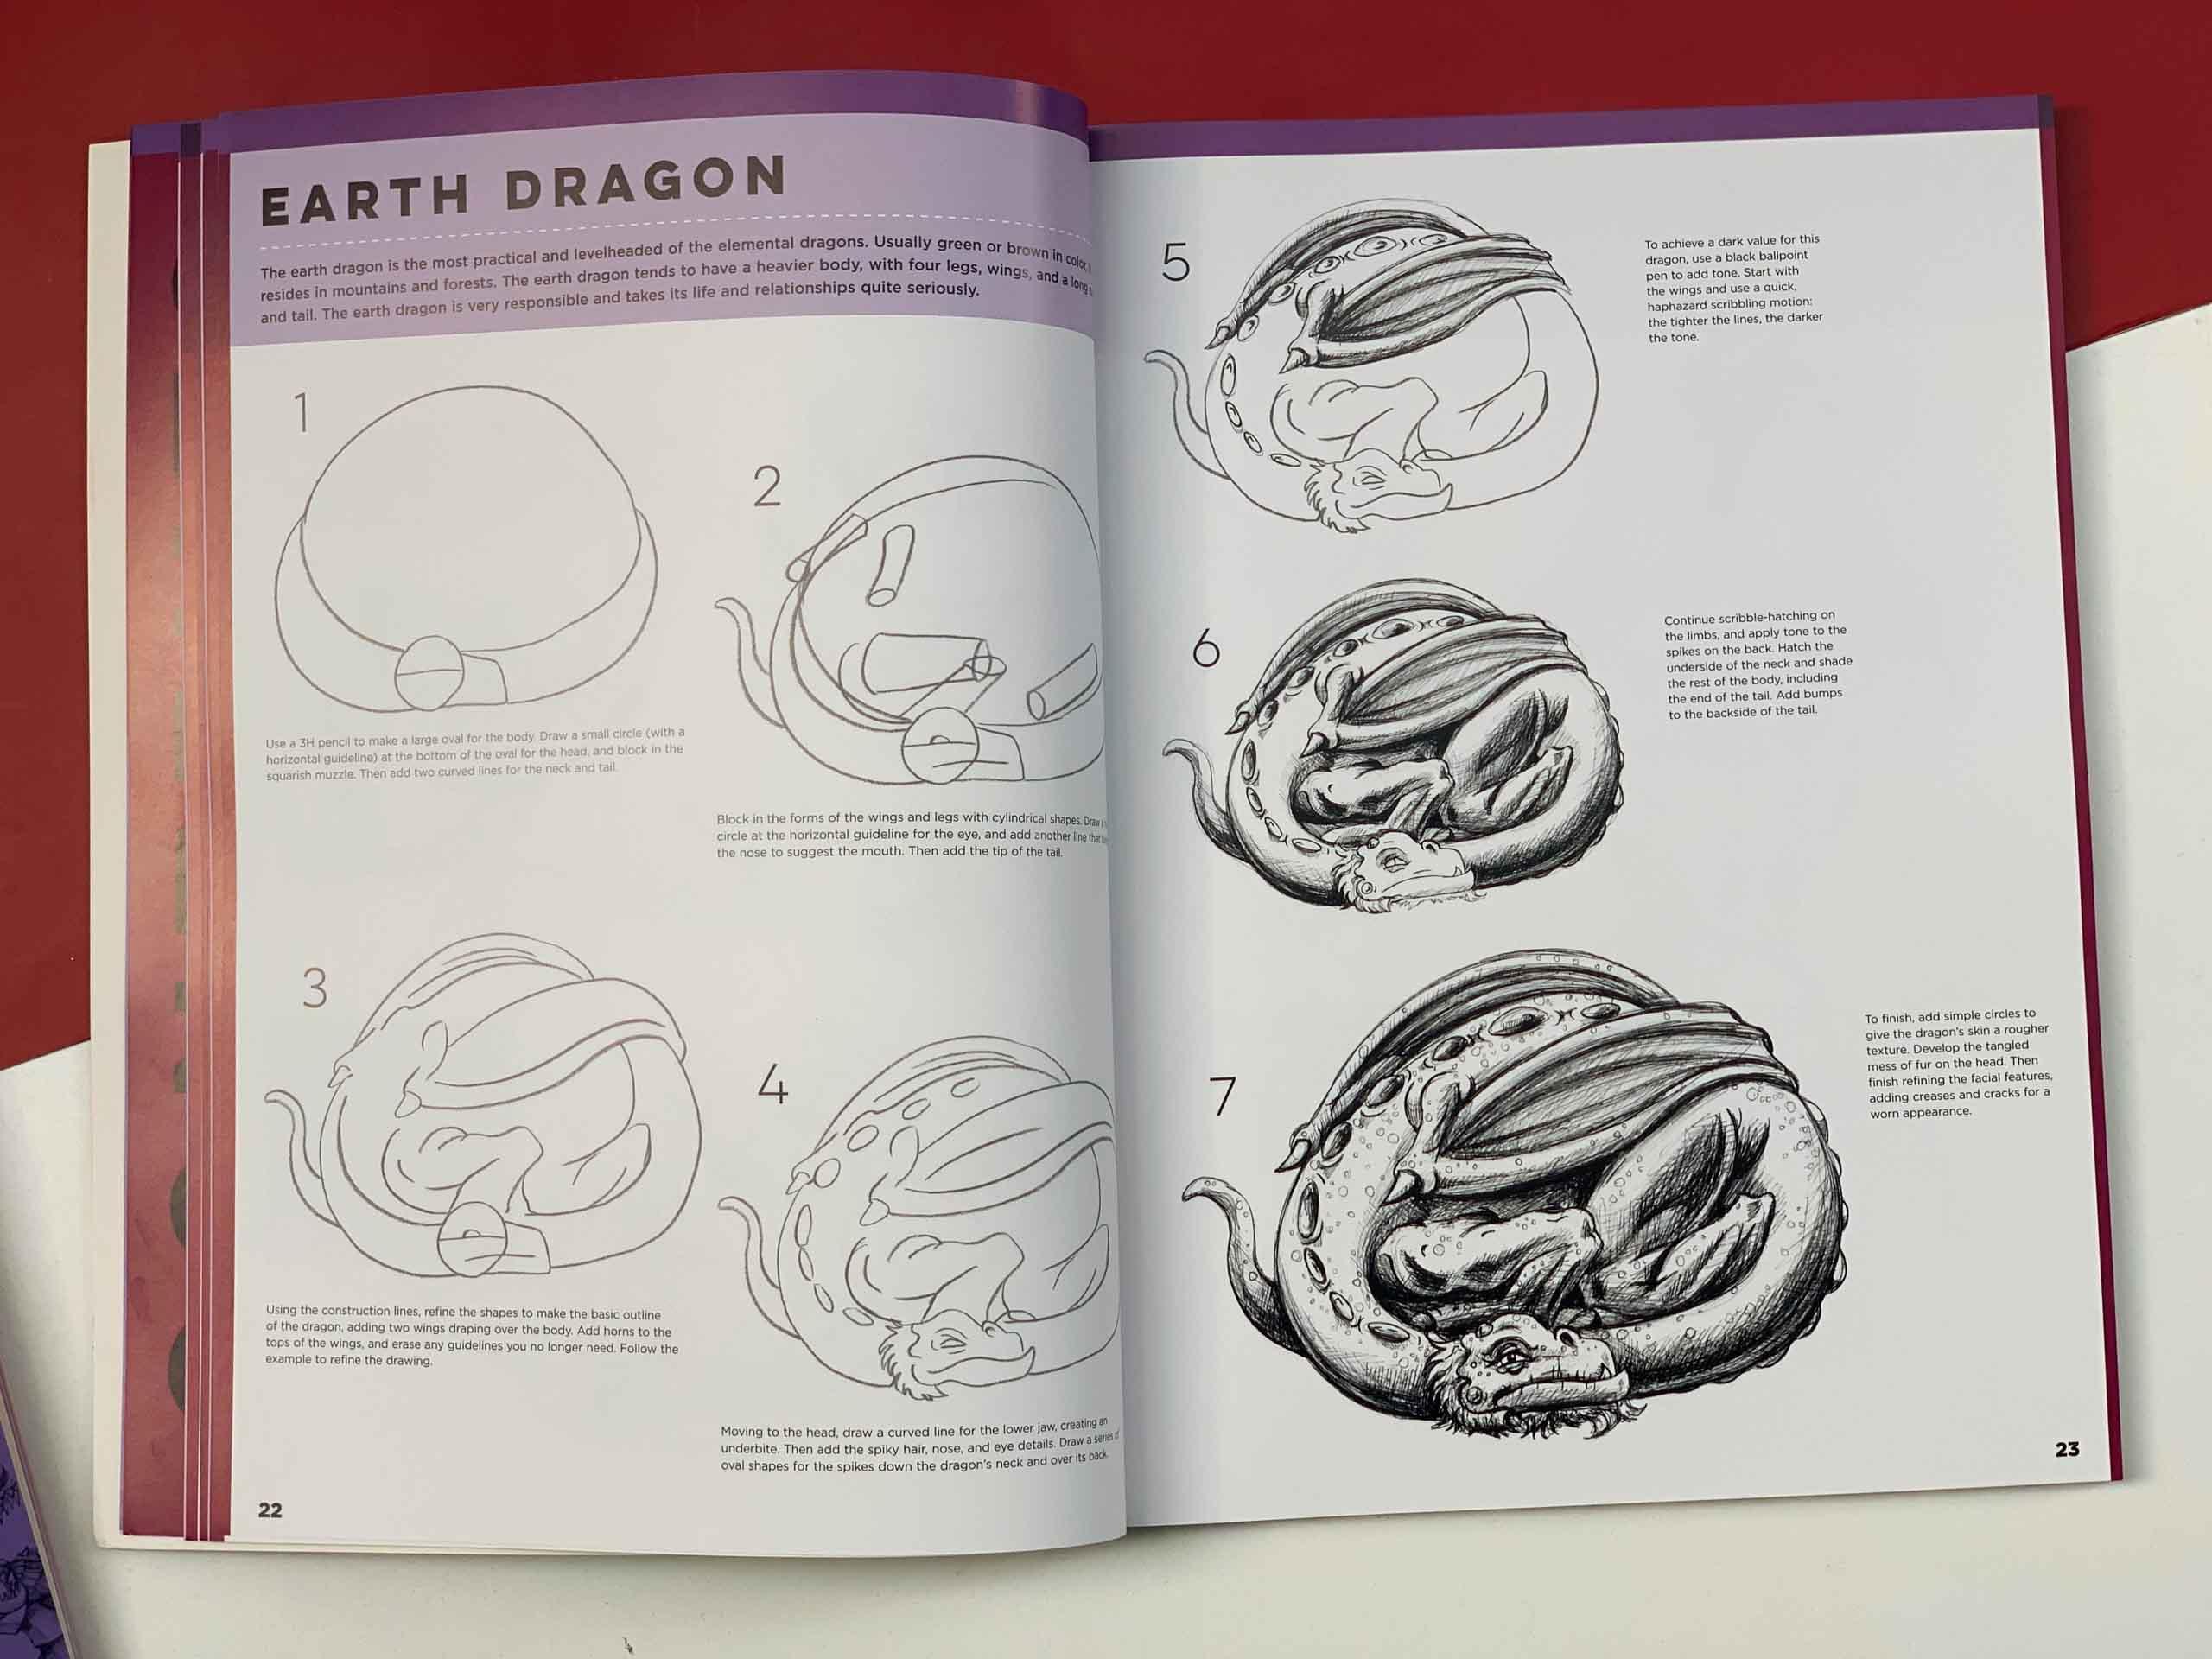 The Art of Drawing Dragons, Mythological Beasts, and Fantasy Creatures